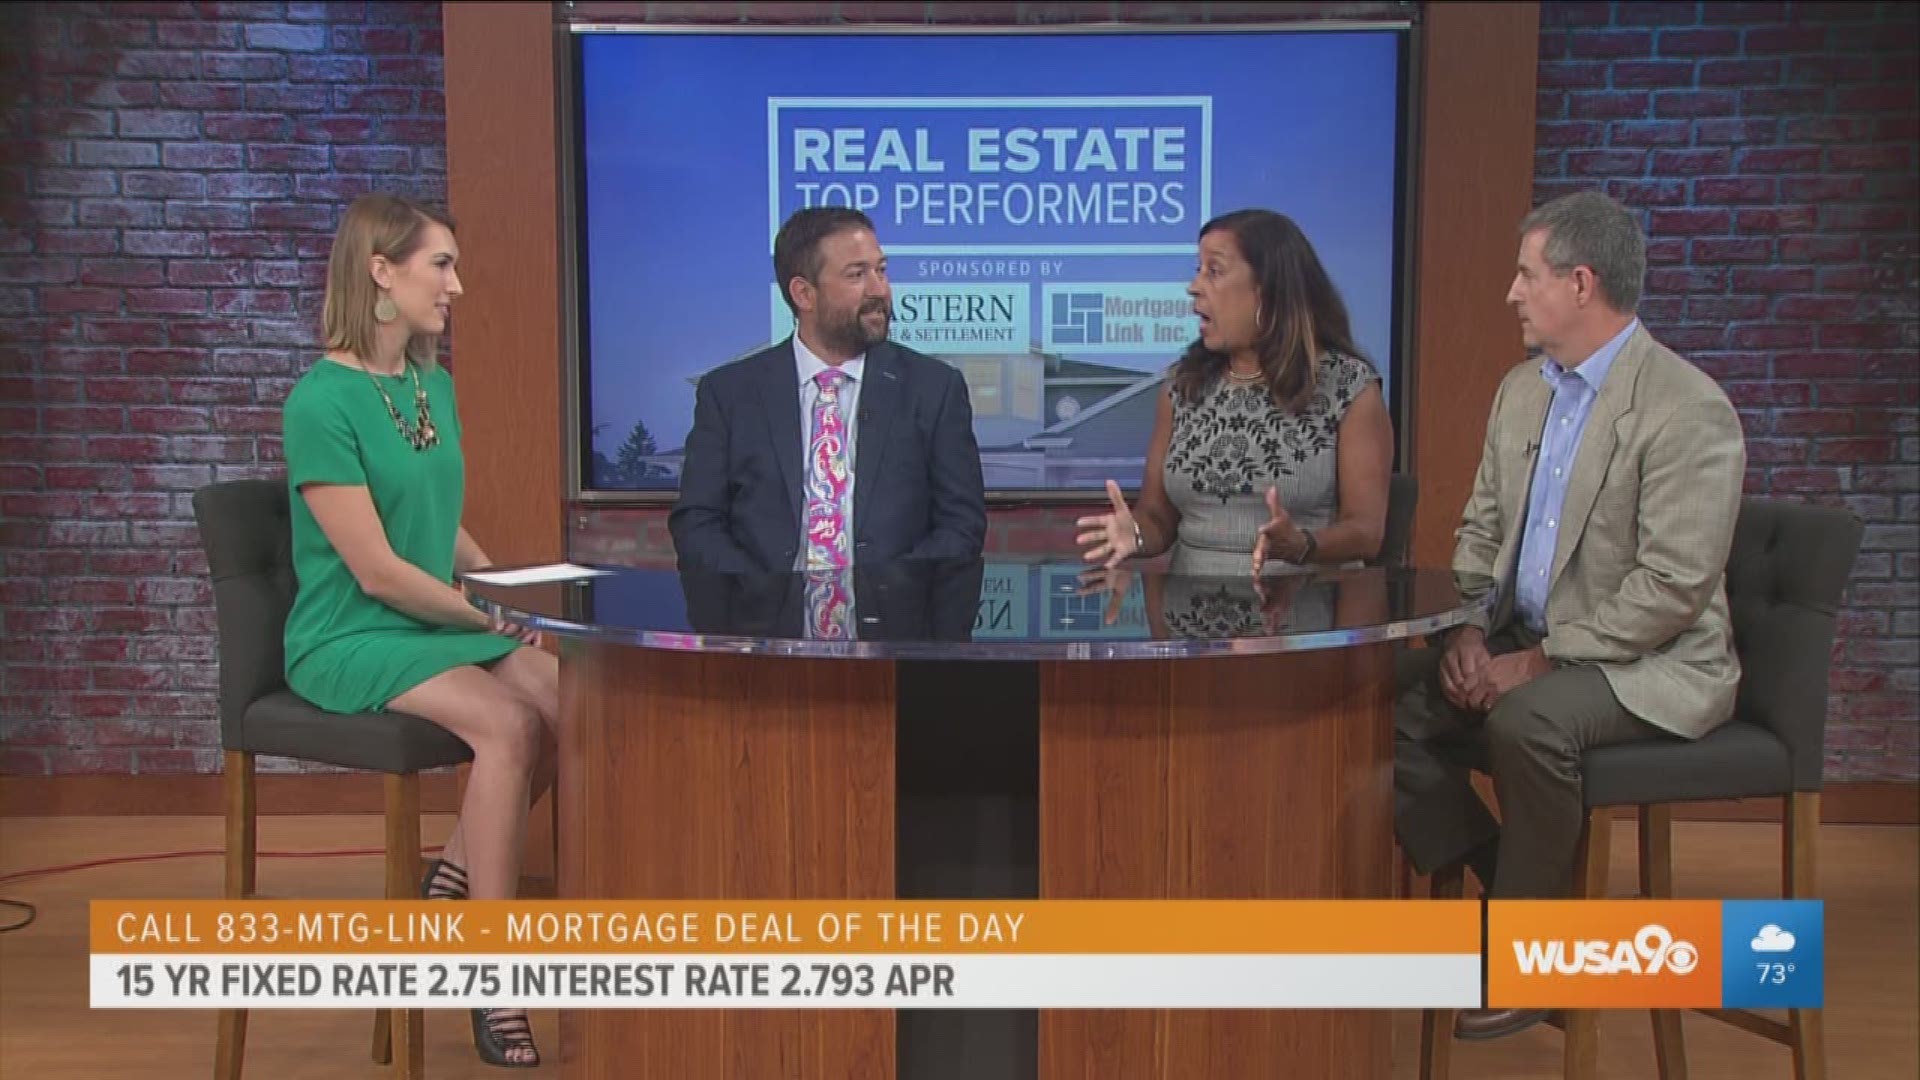 Know the benefits of home ownership versus renting.  Lori Kirkland of the RE/MAX Realty Group joined The Real Estate Top Performers to explain how tax breaks and home appreciation compare to paying rent, especially with yearly increases.  To inquire about a mortgage or refinance call 833-MTG-LINK or visit themtglink.com .  This segment is sponsored by the Real Estate Top Performers.